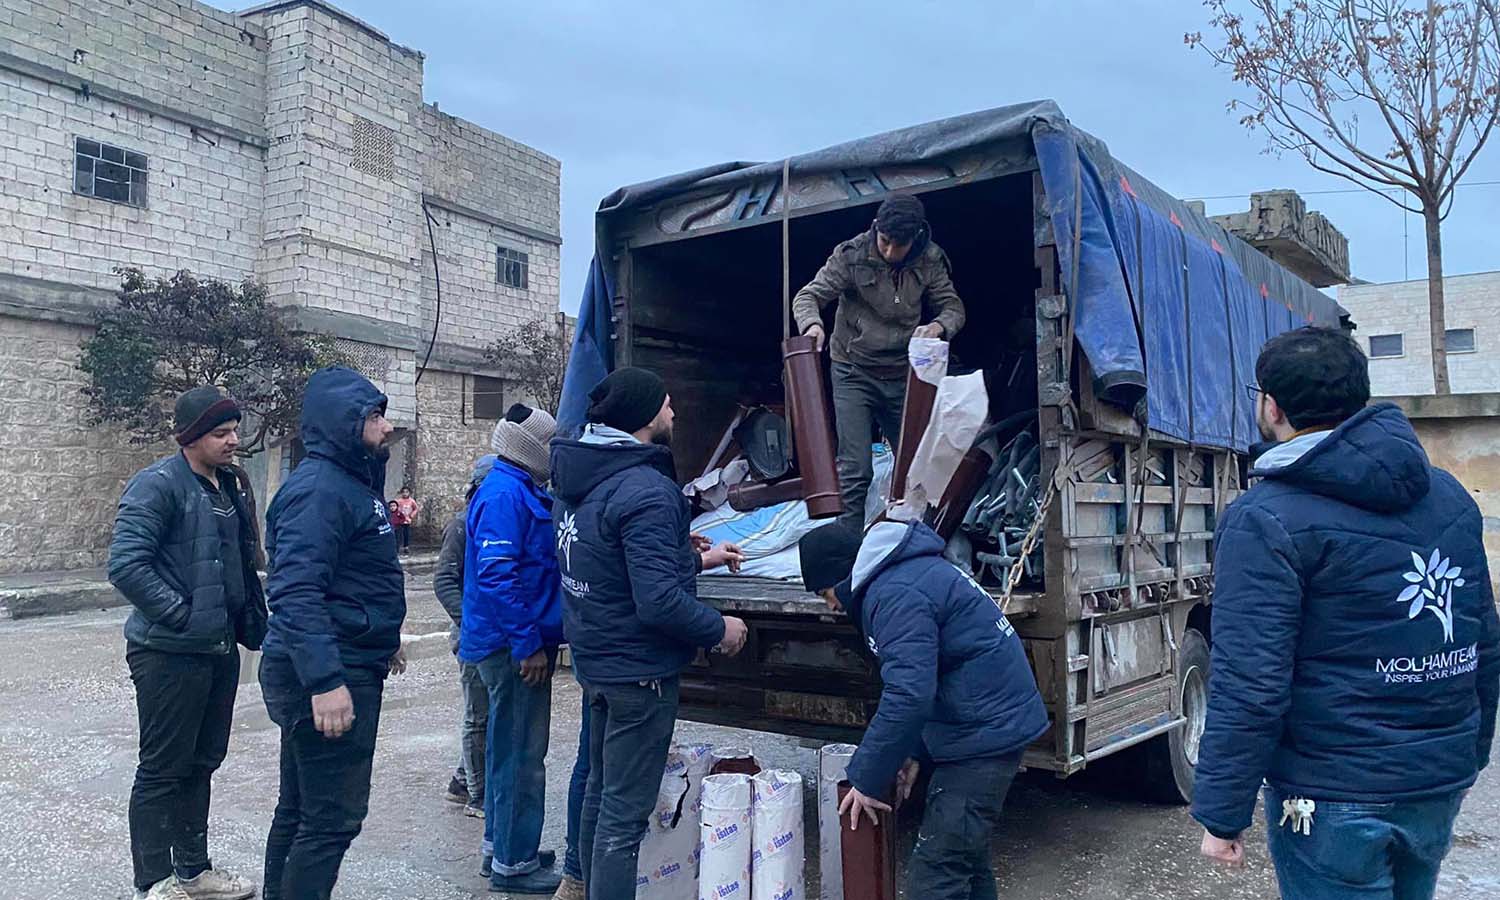 The Molham Volunteering Team during operations to respond to the effects of the earthquake in the border city of al-Bab - February 7, 2023 (Facebook/Molham Volunteering Team)